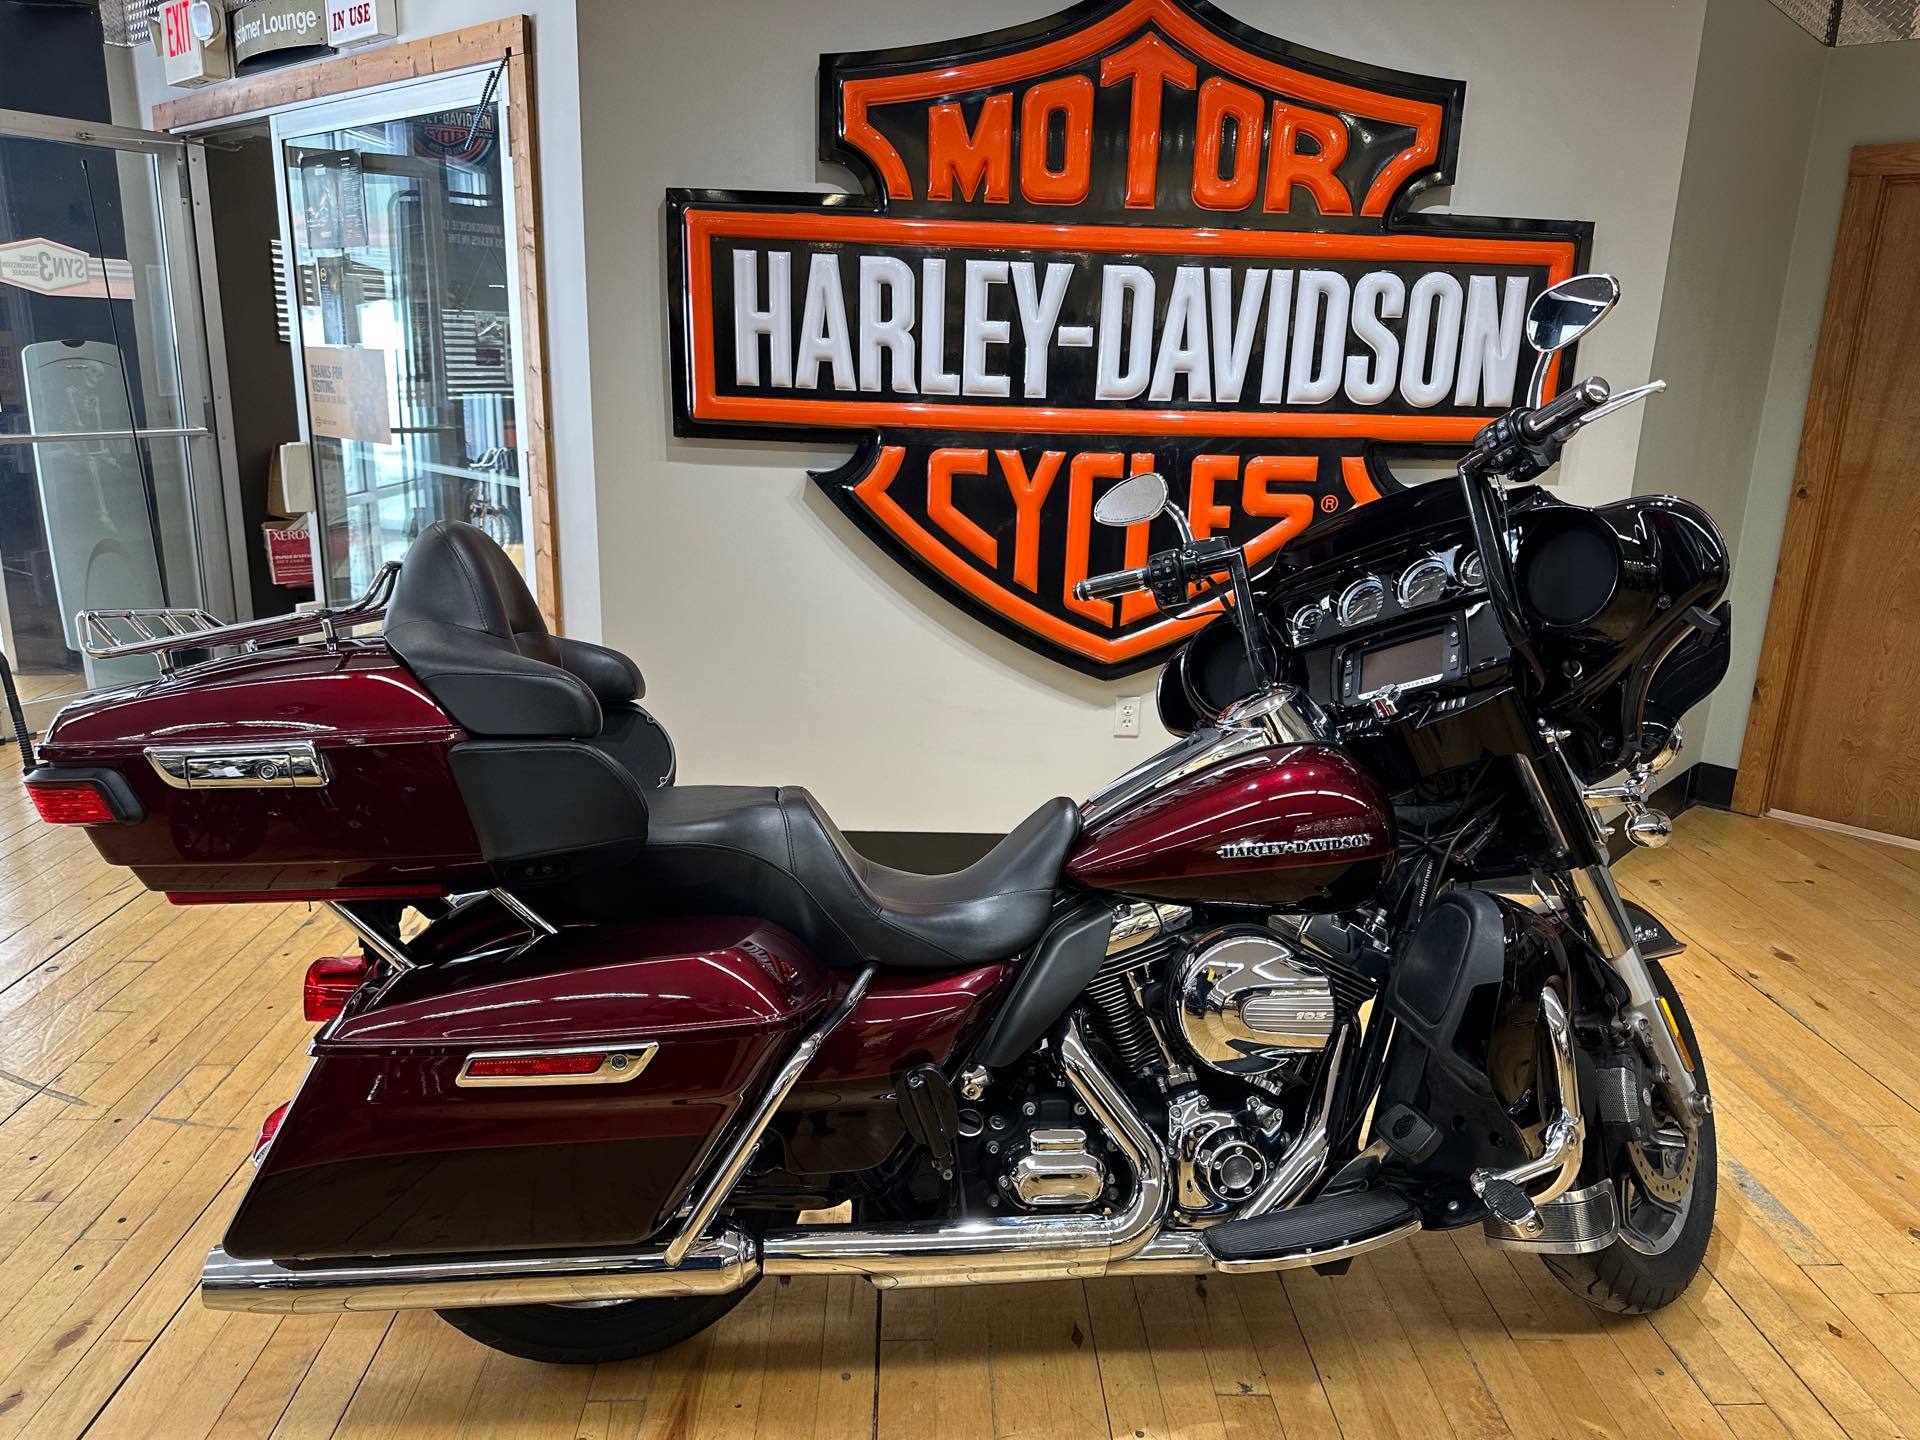 2015 Harley-Davidson Electra Glide Ultra Limited Low at Zips 45th Parallel Harley-Davidson